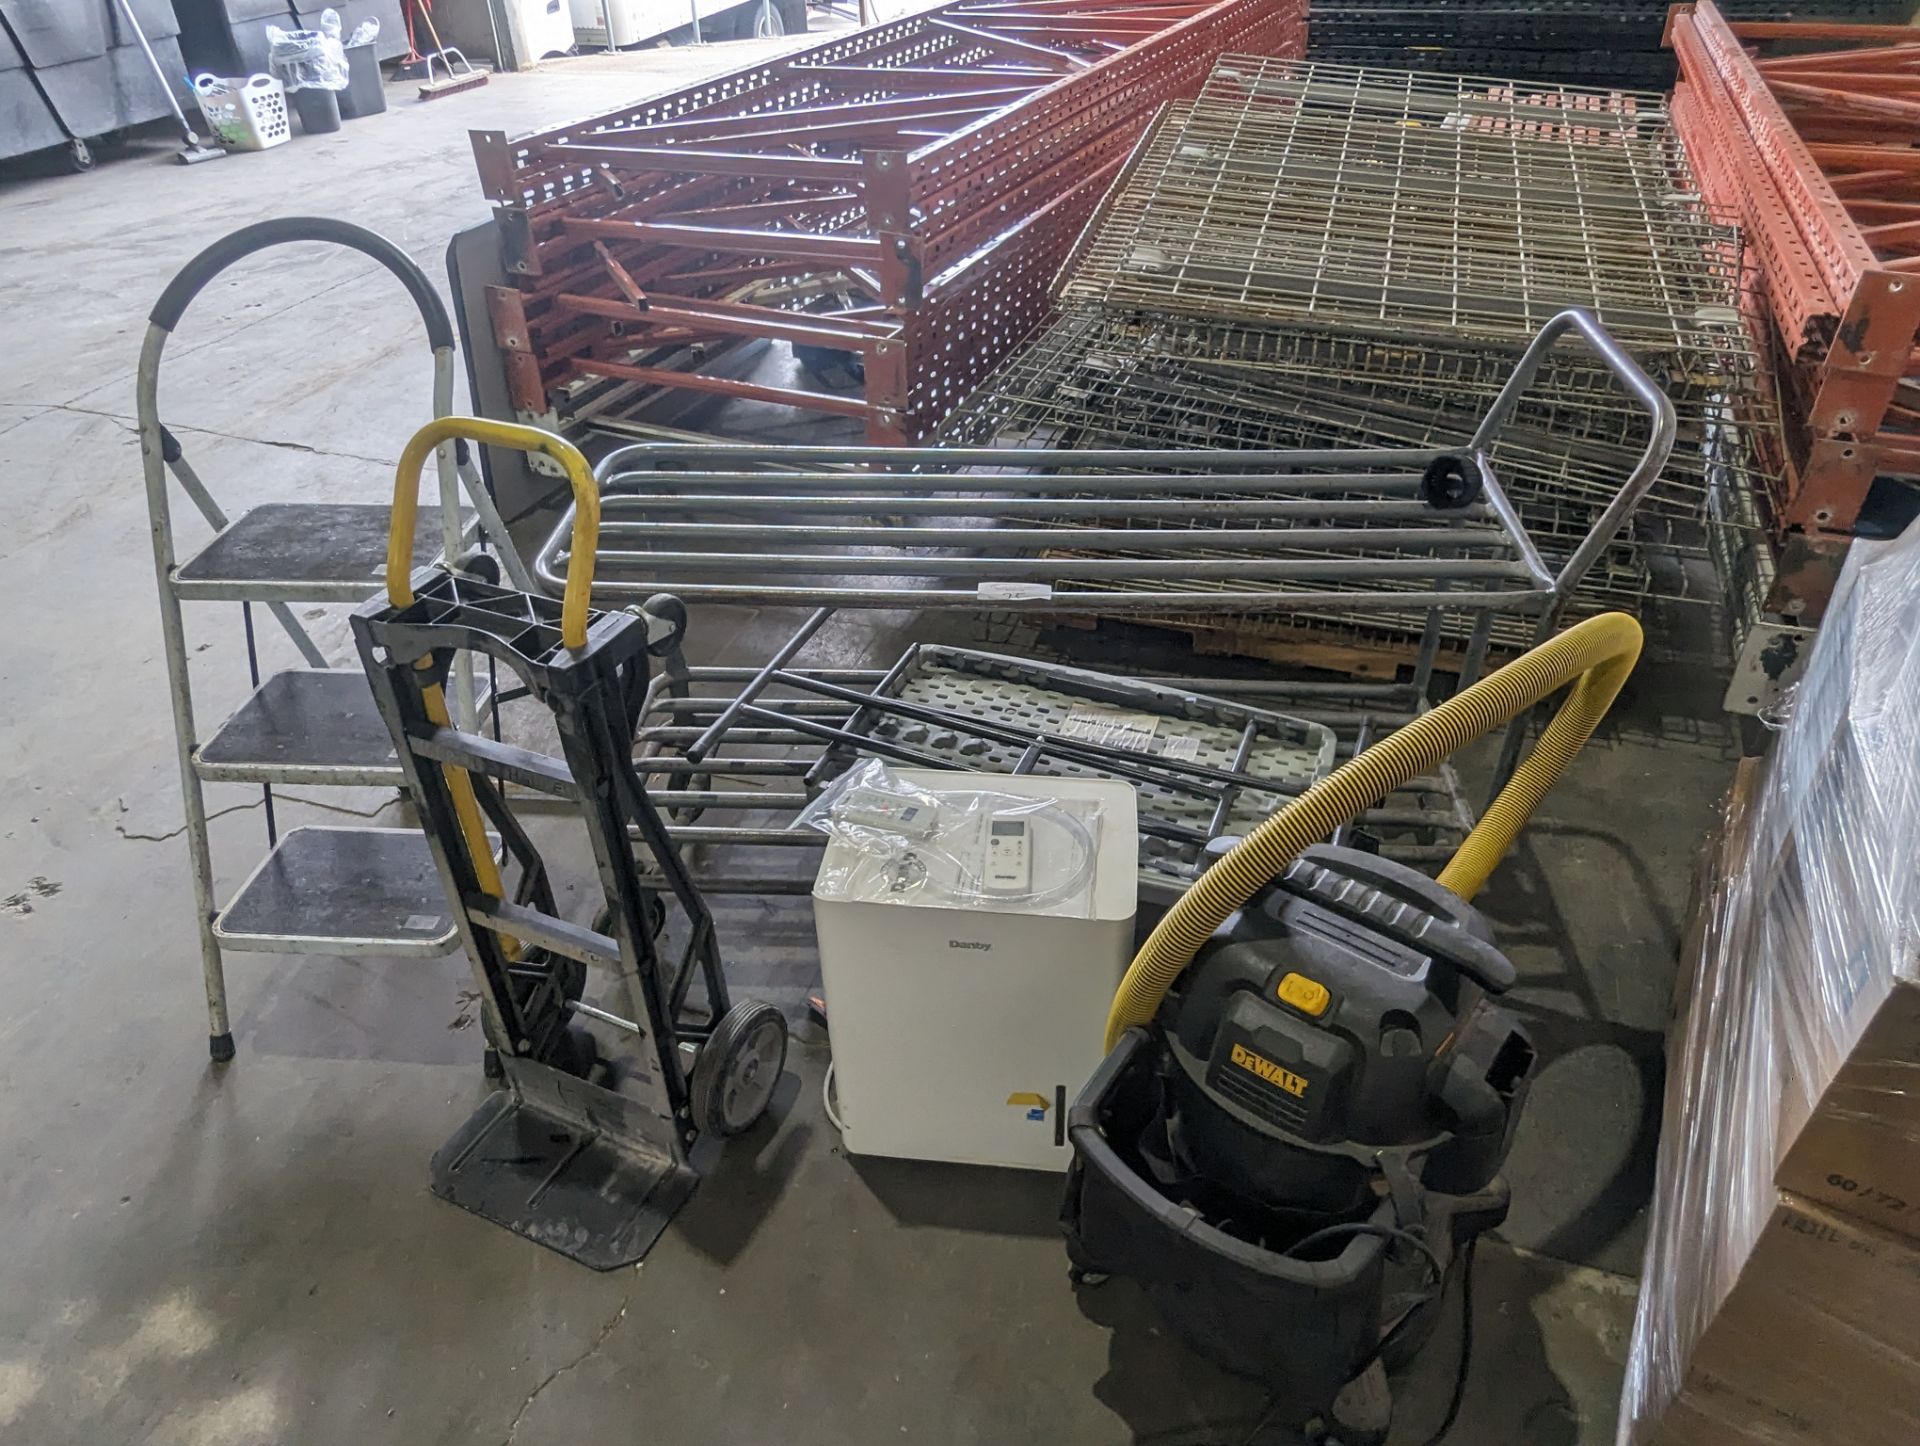 Stock Cart, Air Conditioner, Shop Vac and Step Ladder